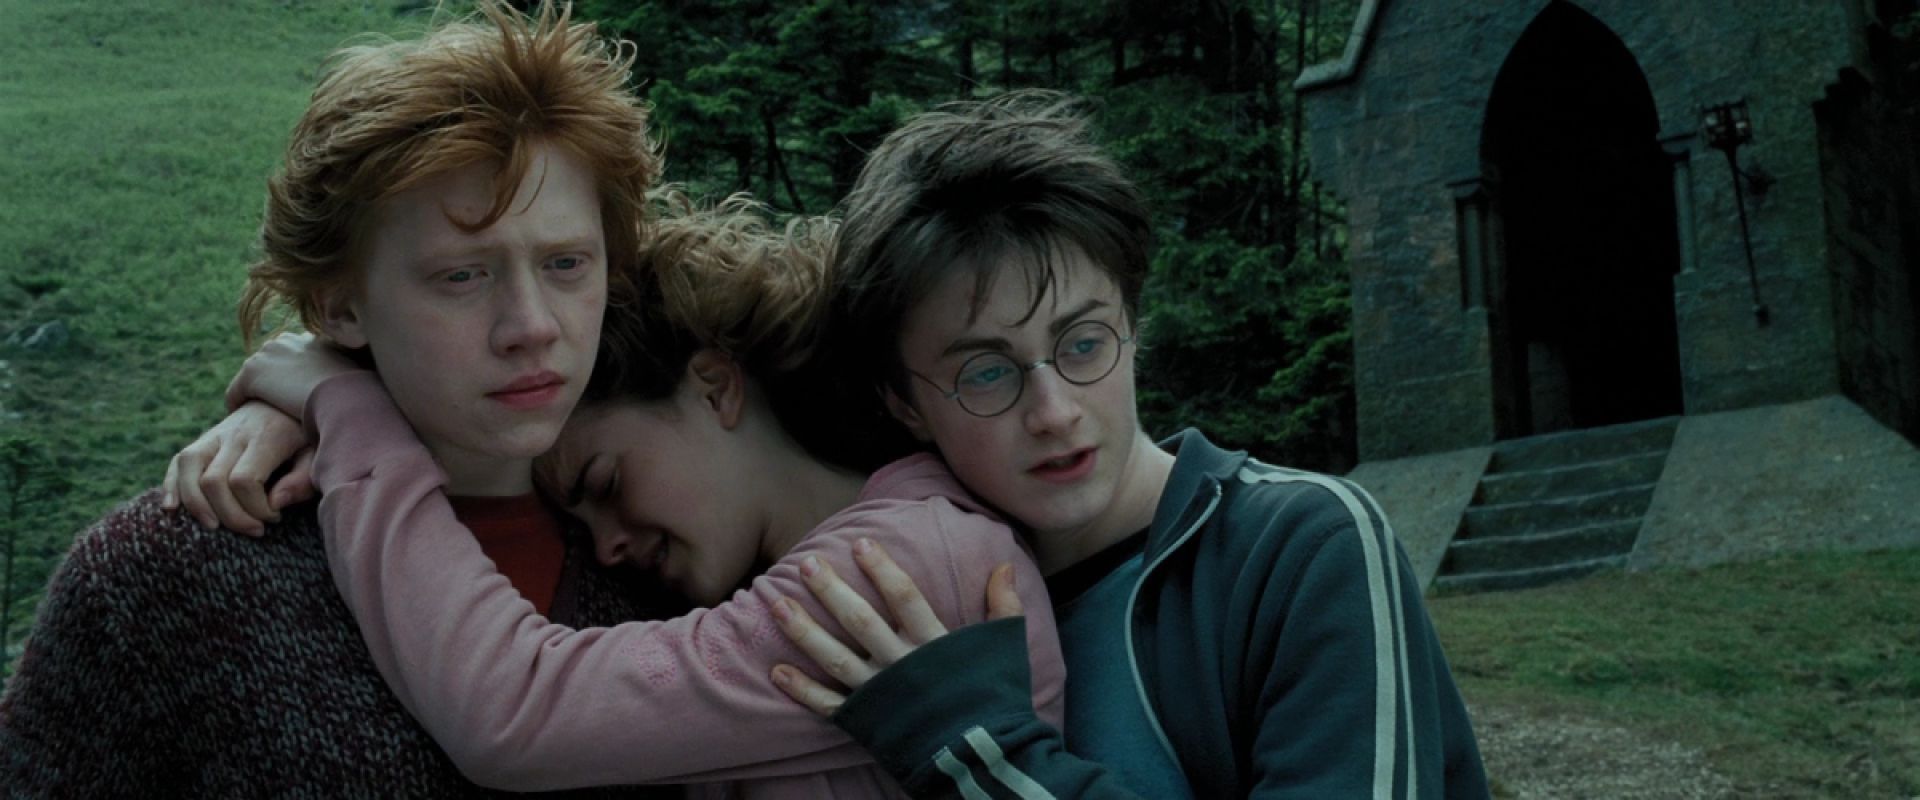 Ron Weasley, Hermione Granger, and Harry Potter stand in a group hug